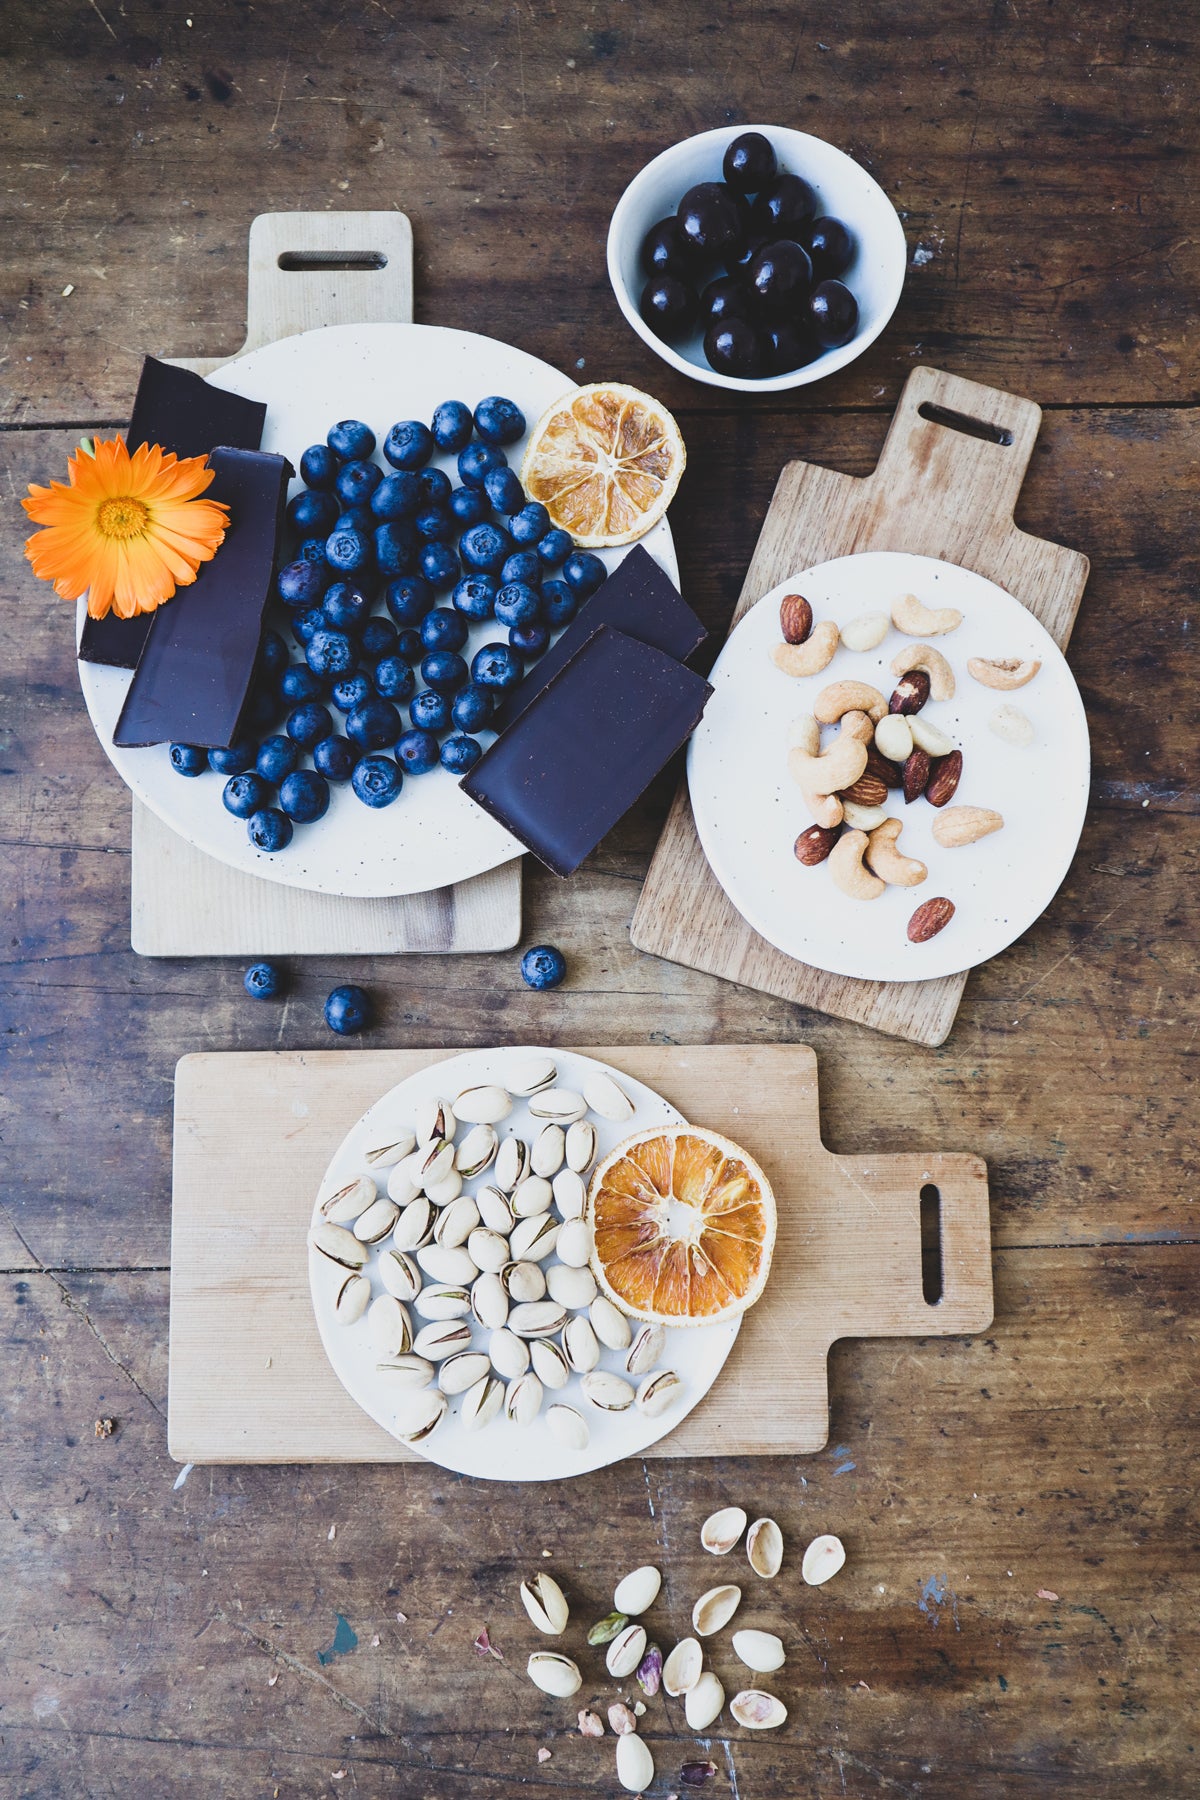 Jason Grant styles a grazing board with Winterwares ceramics and blueberries